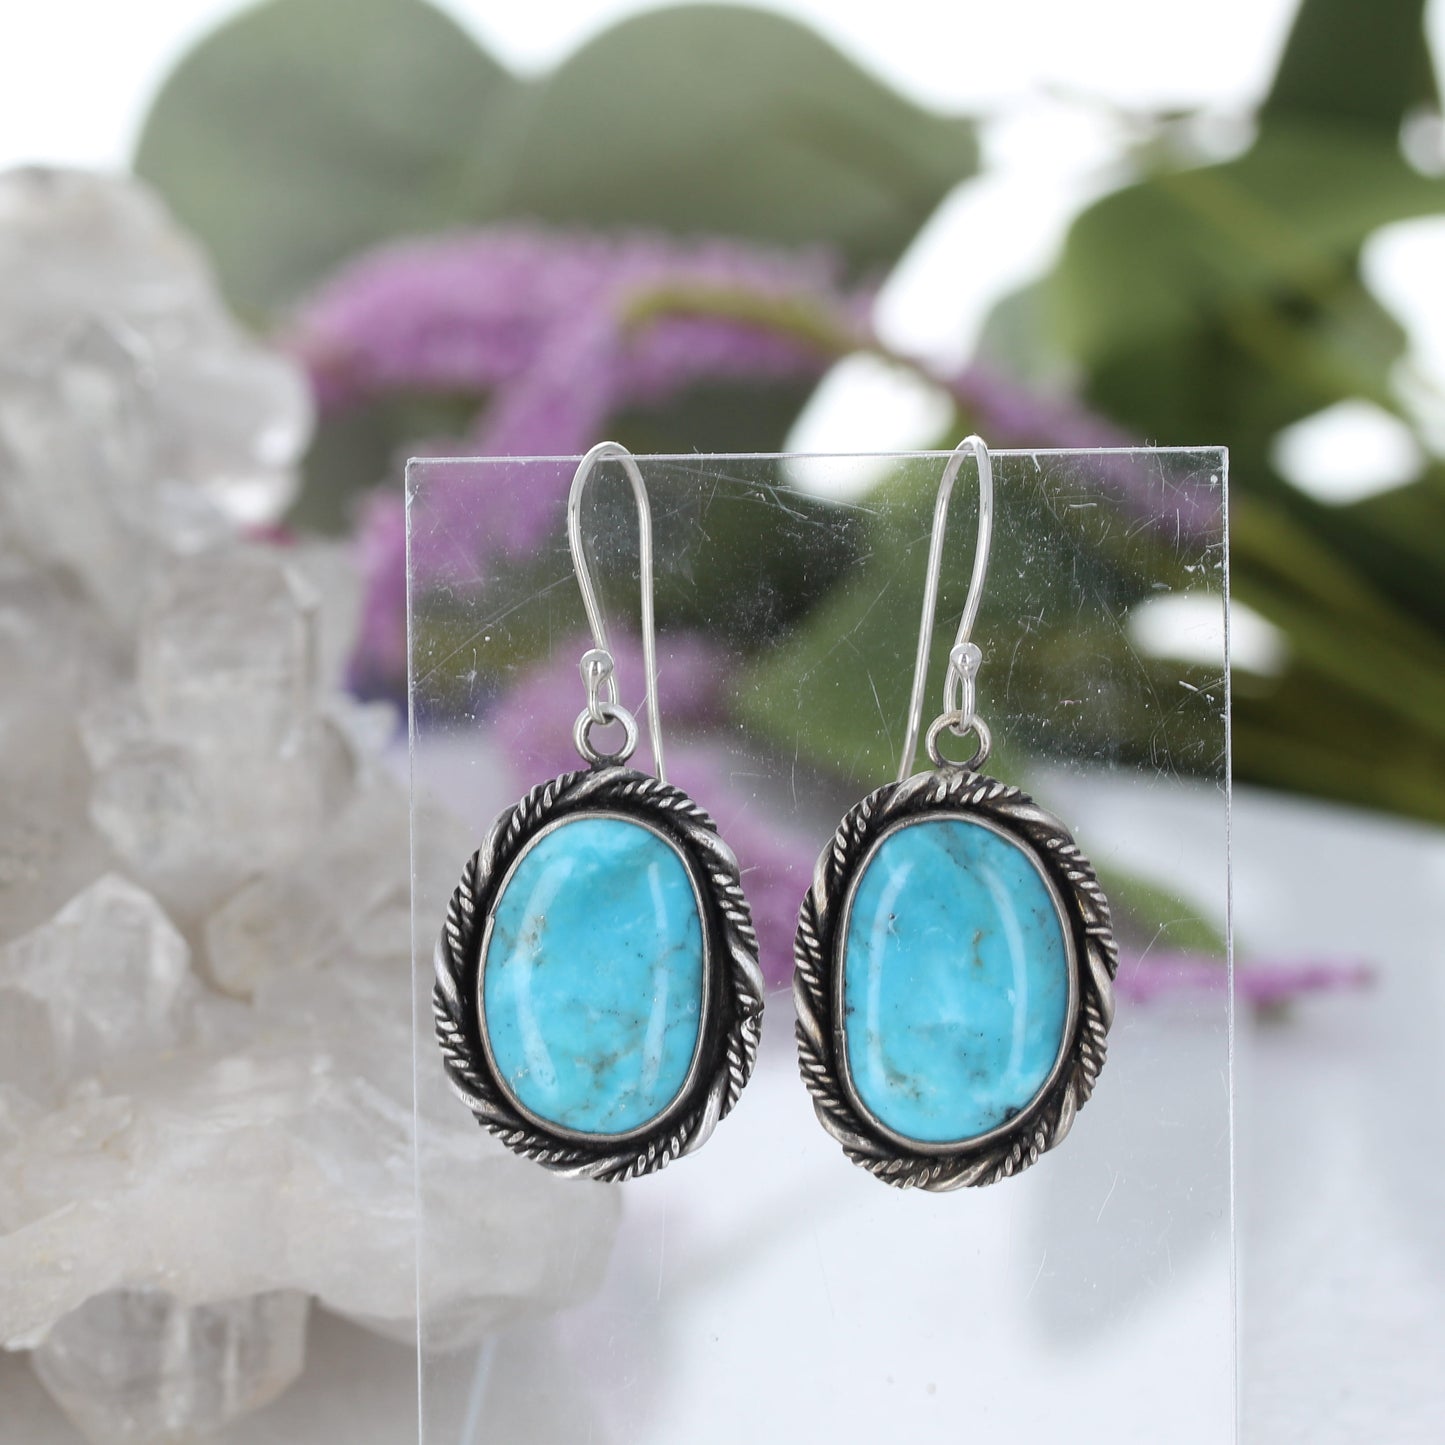 CAMPITOS TURQUOISE EARRINGS Free Form Sterling Silver